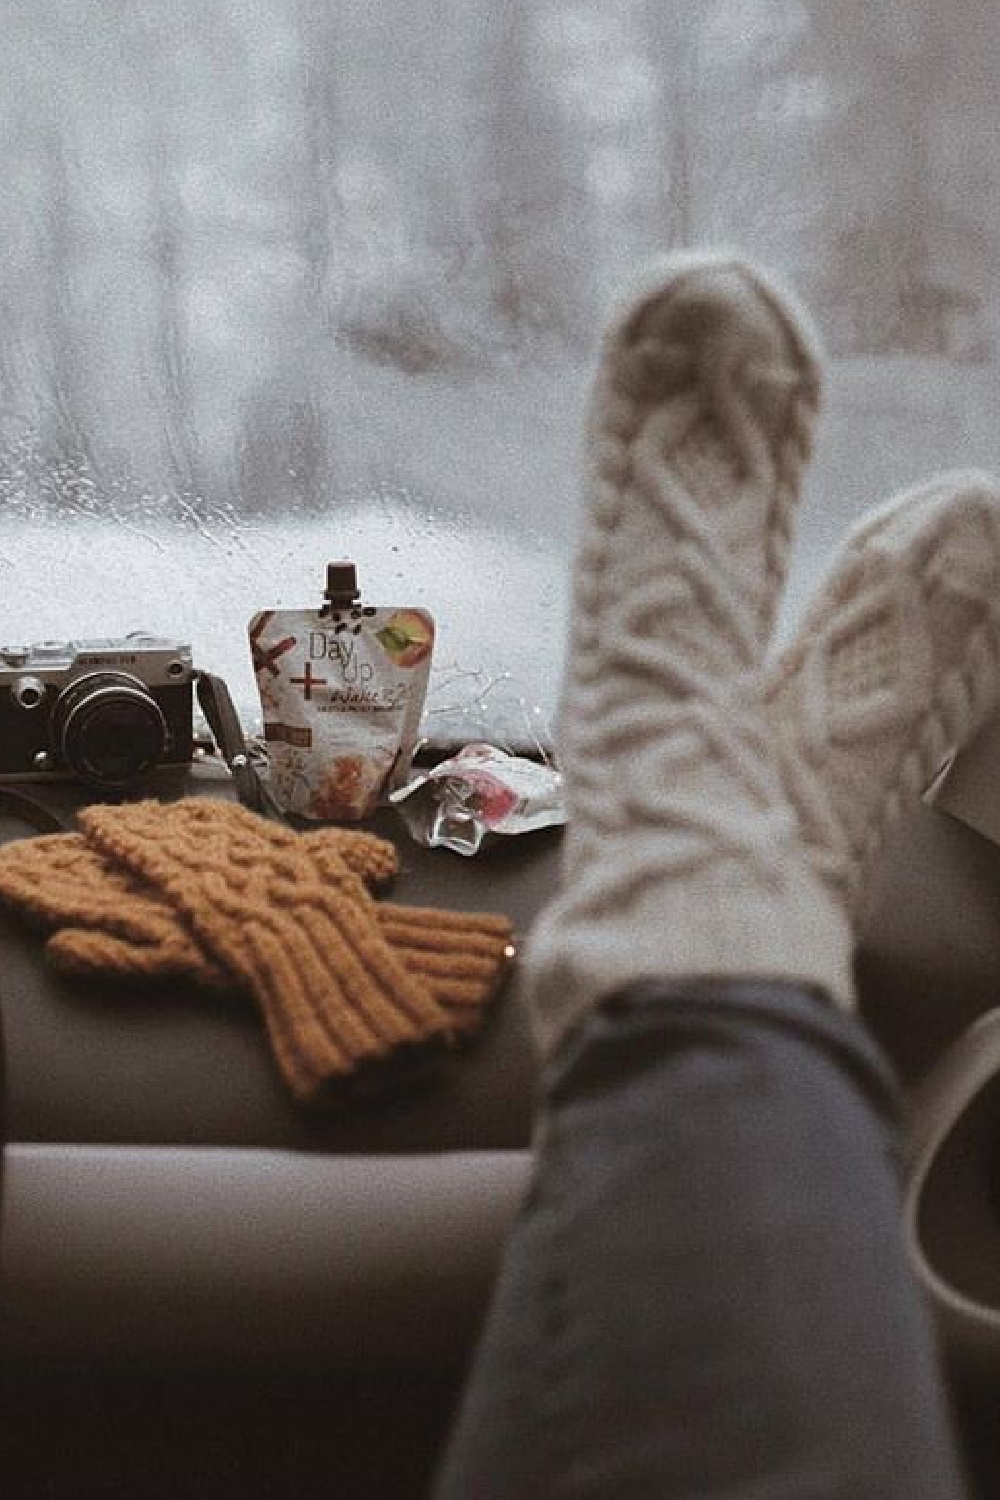 Beautiful handknit wool cableknit socks kicked up on dashboard with snowy woods outside - @woolsocool. #cozysocks